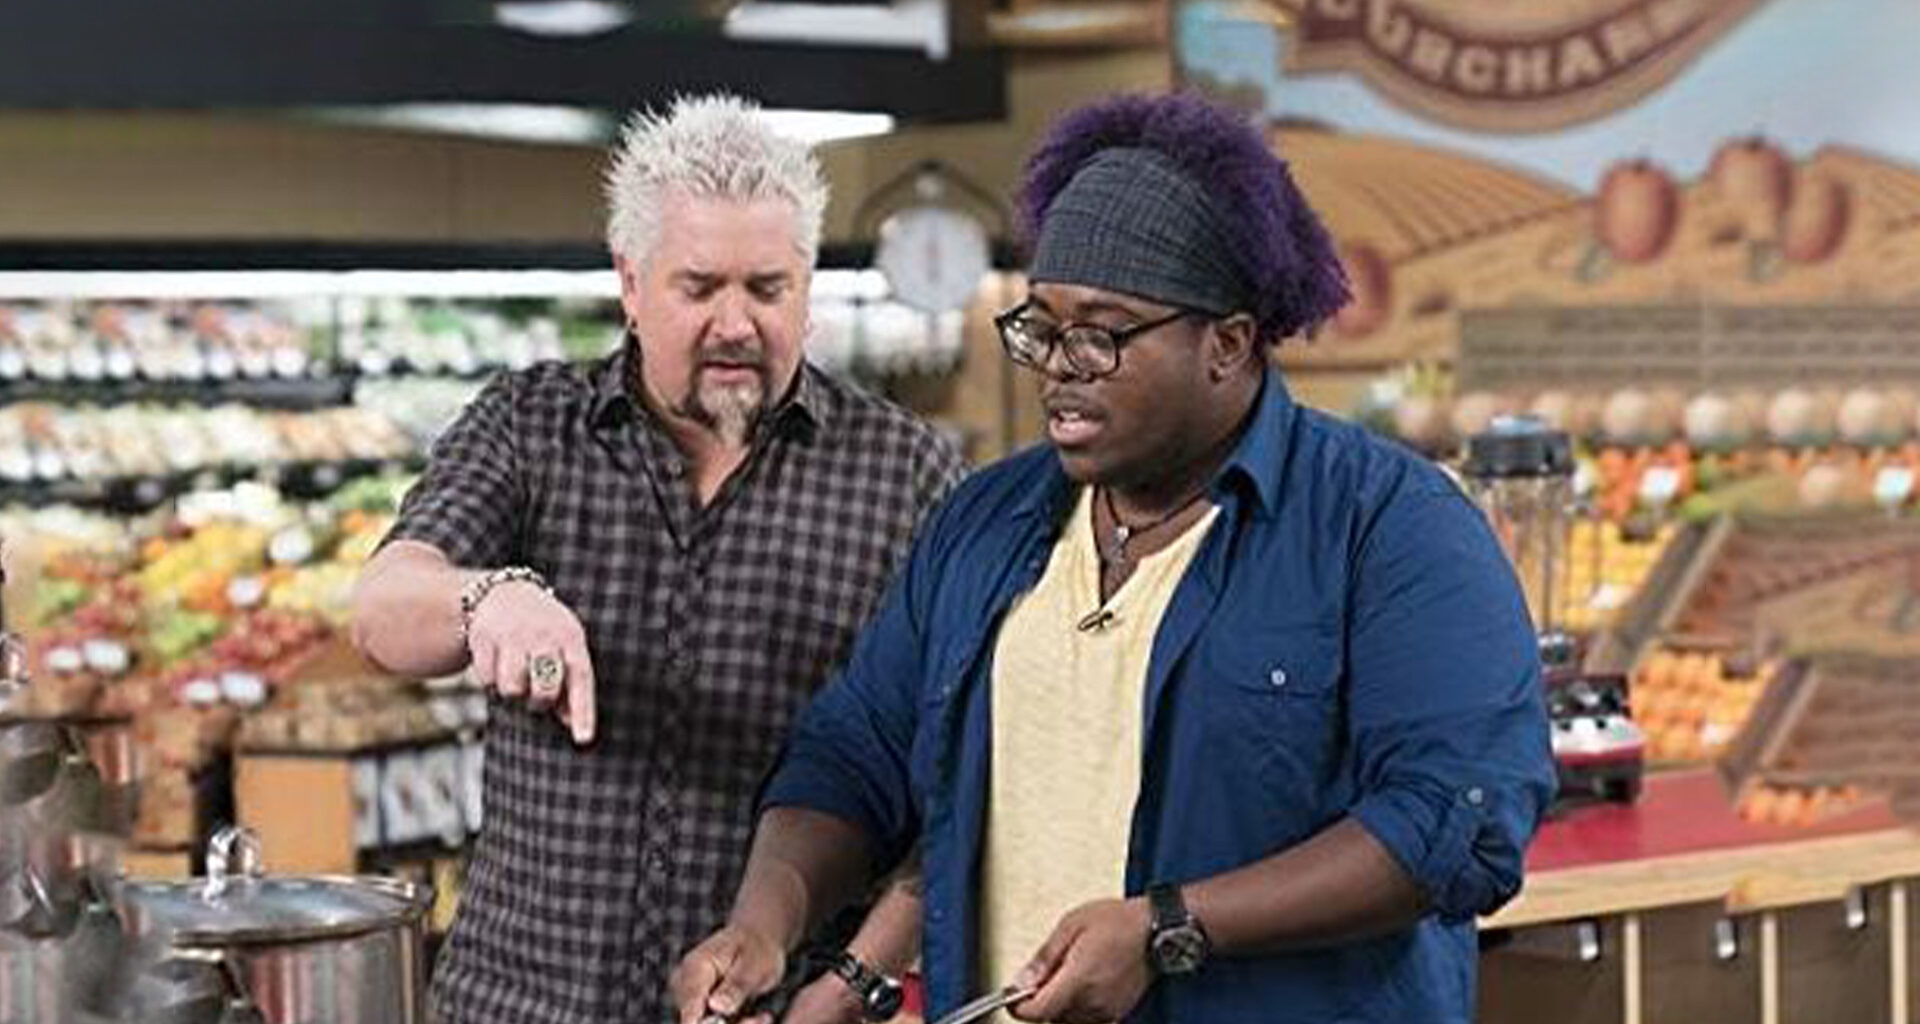 Food Network fans ‘unreasonably ragey’ over ‘gross’ behavior and insist there’s ‘no reason’ for stars to act this way